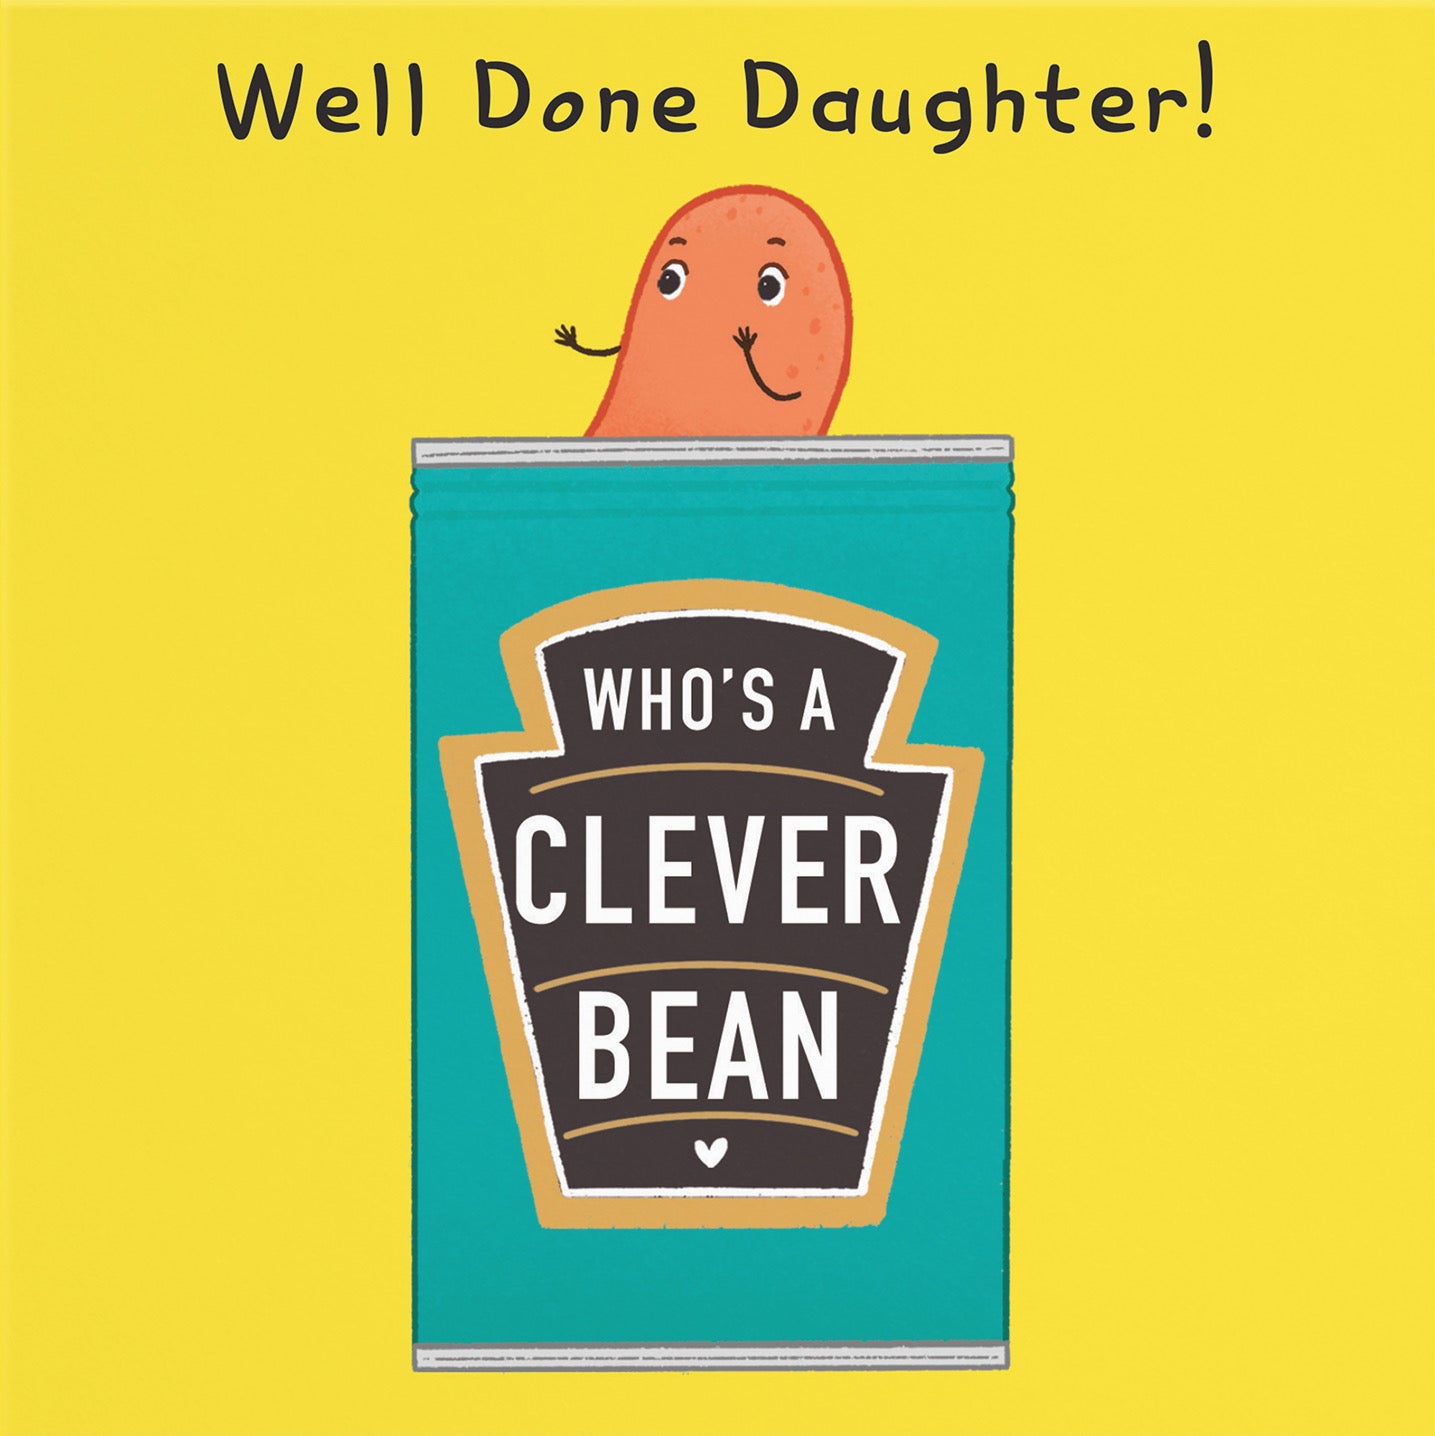 Daughter Clever Bean Well Done Card Iconic - Default Title (B0B52JXR4K)